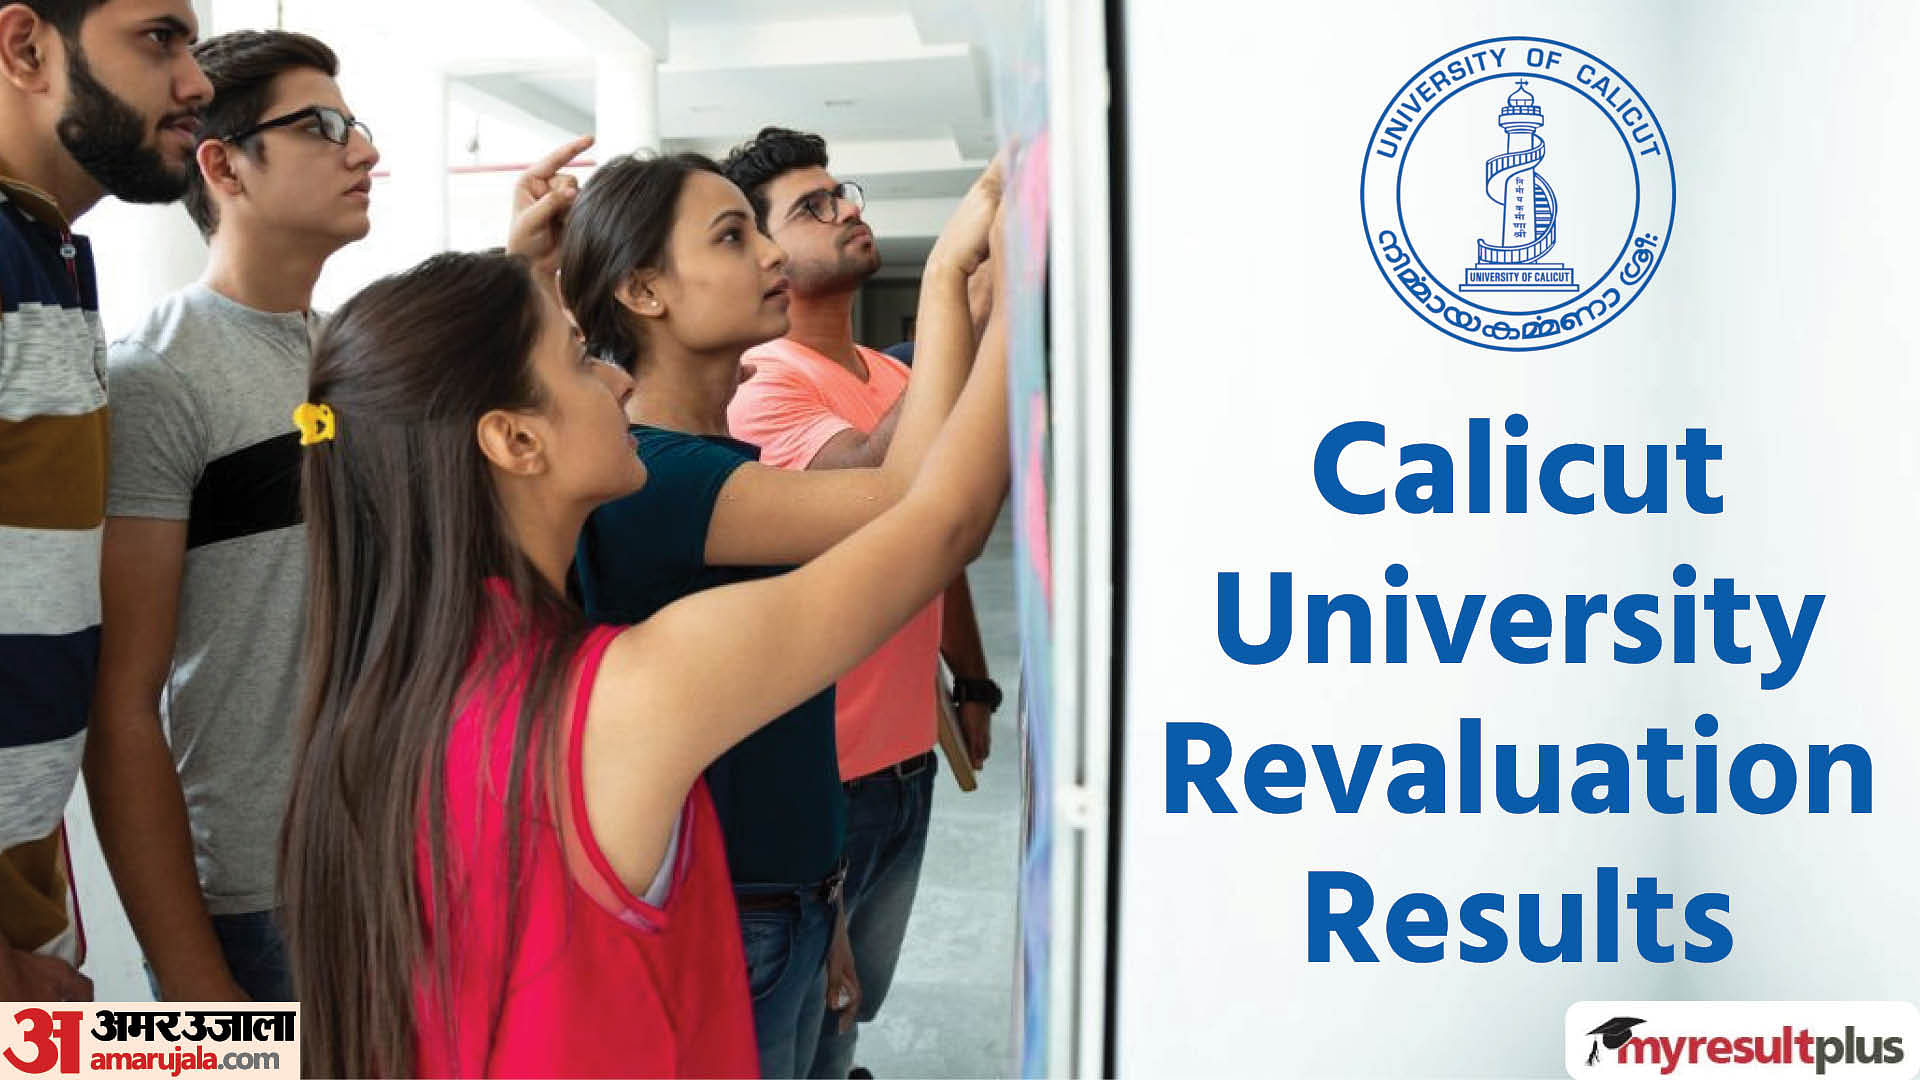 Calicut University Revaluation Results 2023 out now, Read the official notice and steps to check scores here